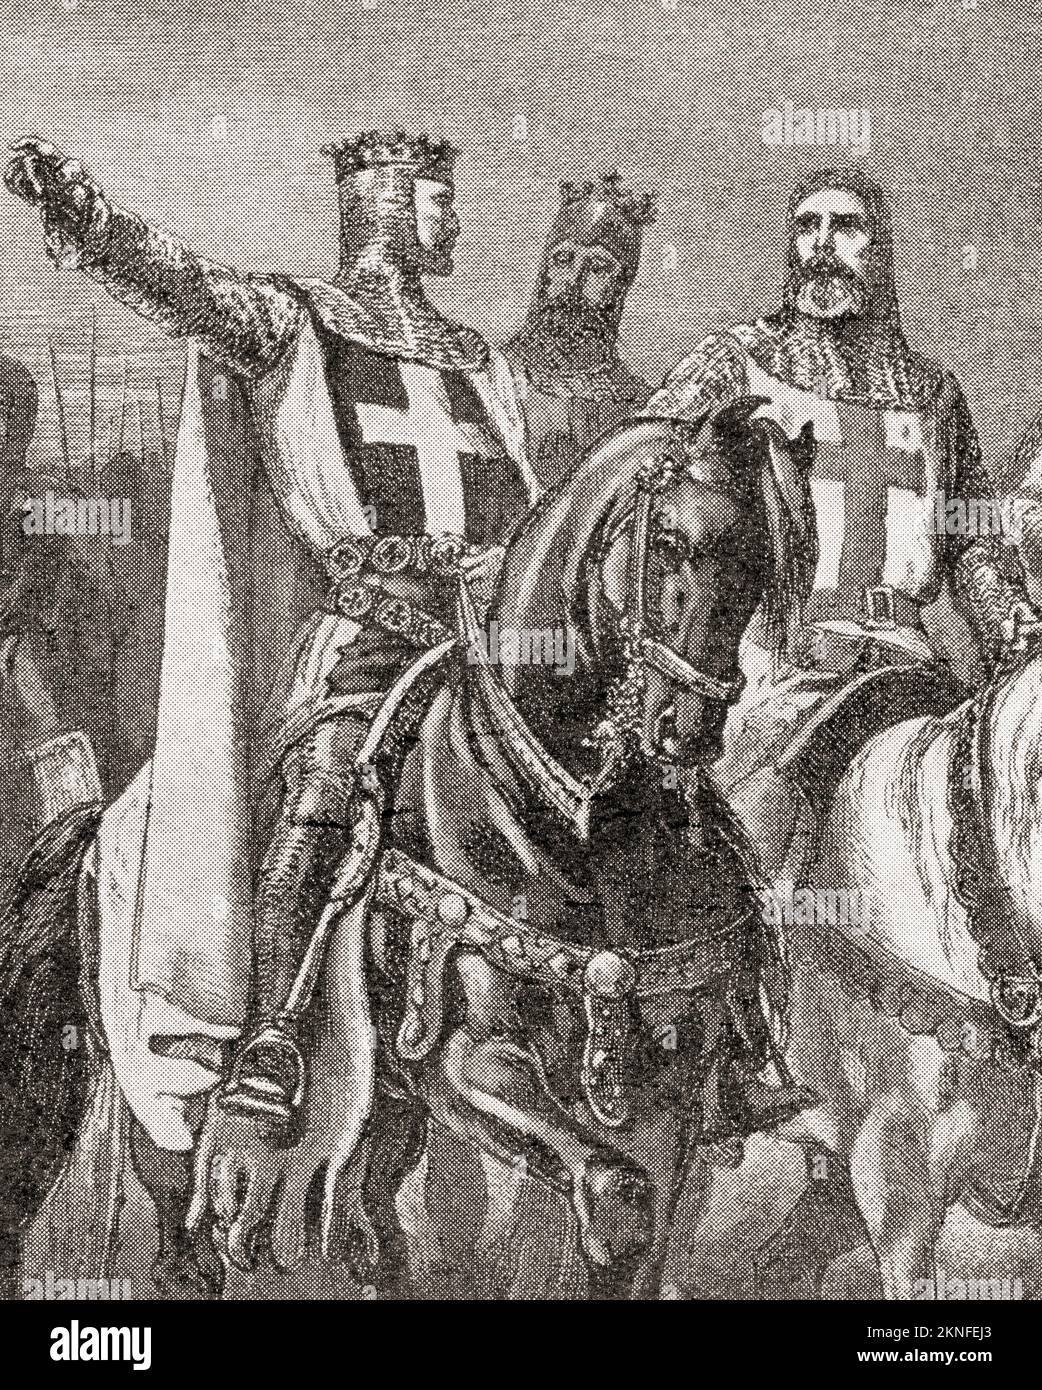 Richard I, aka Richard Cœur de Lion or Richard the Lionheart 1157 – 1199.  King of England. Seen here during the third crusade.  From History of England, published 1907 Stock Photo